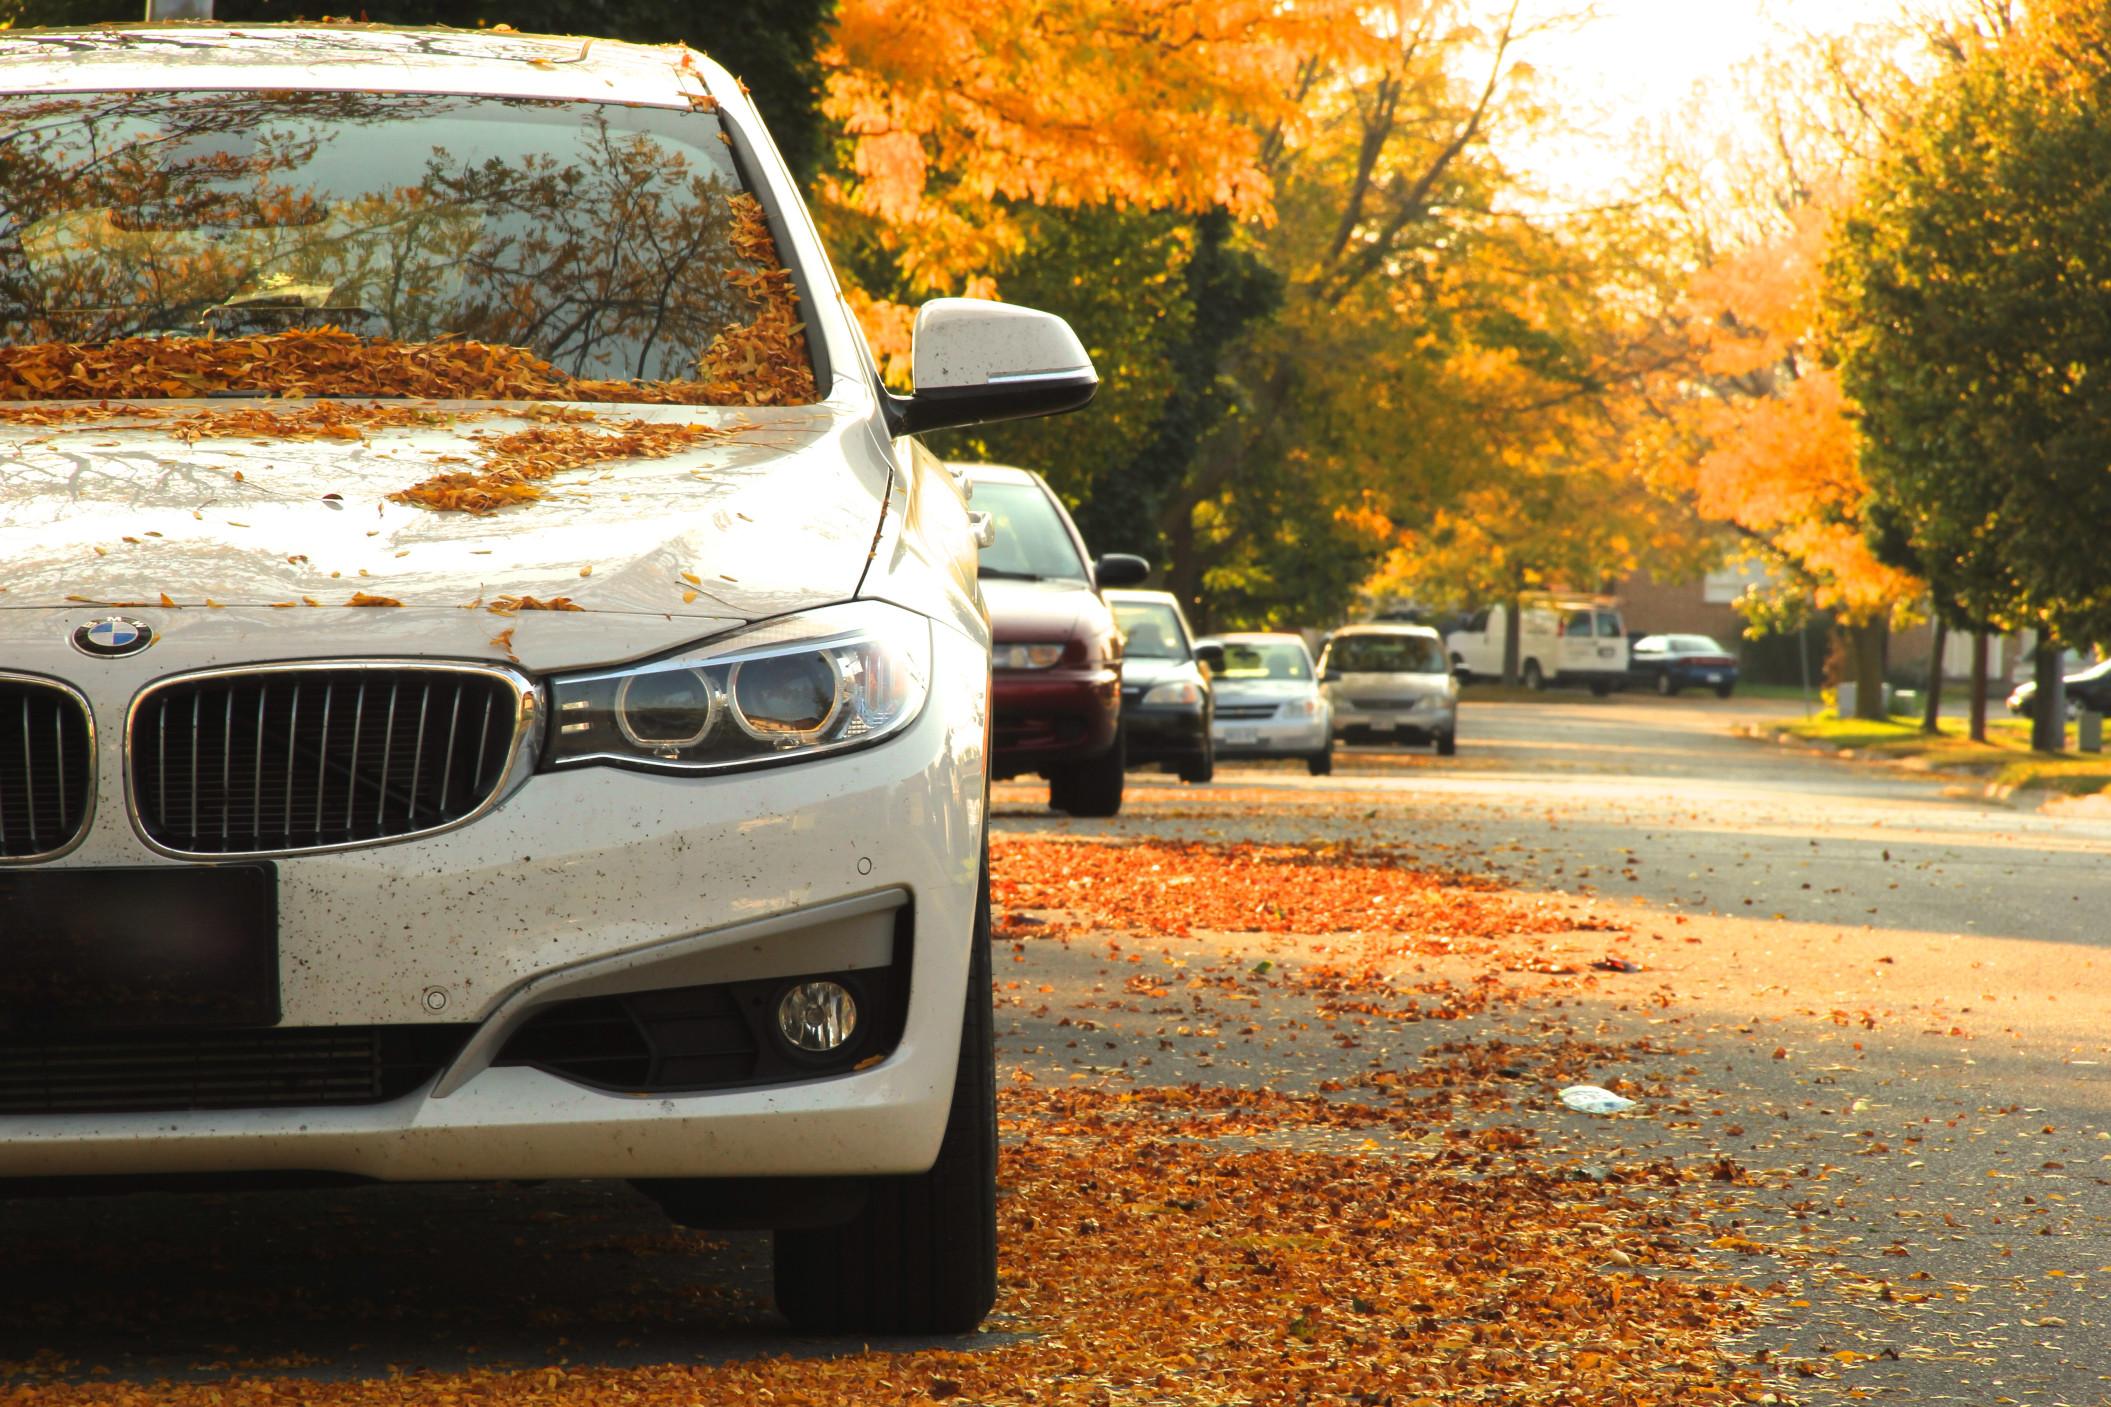 Pumpkin spice car accessories are perfect for fall.